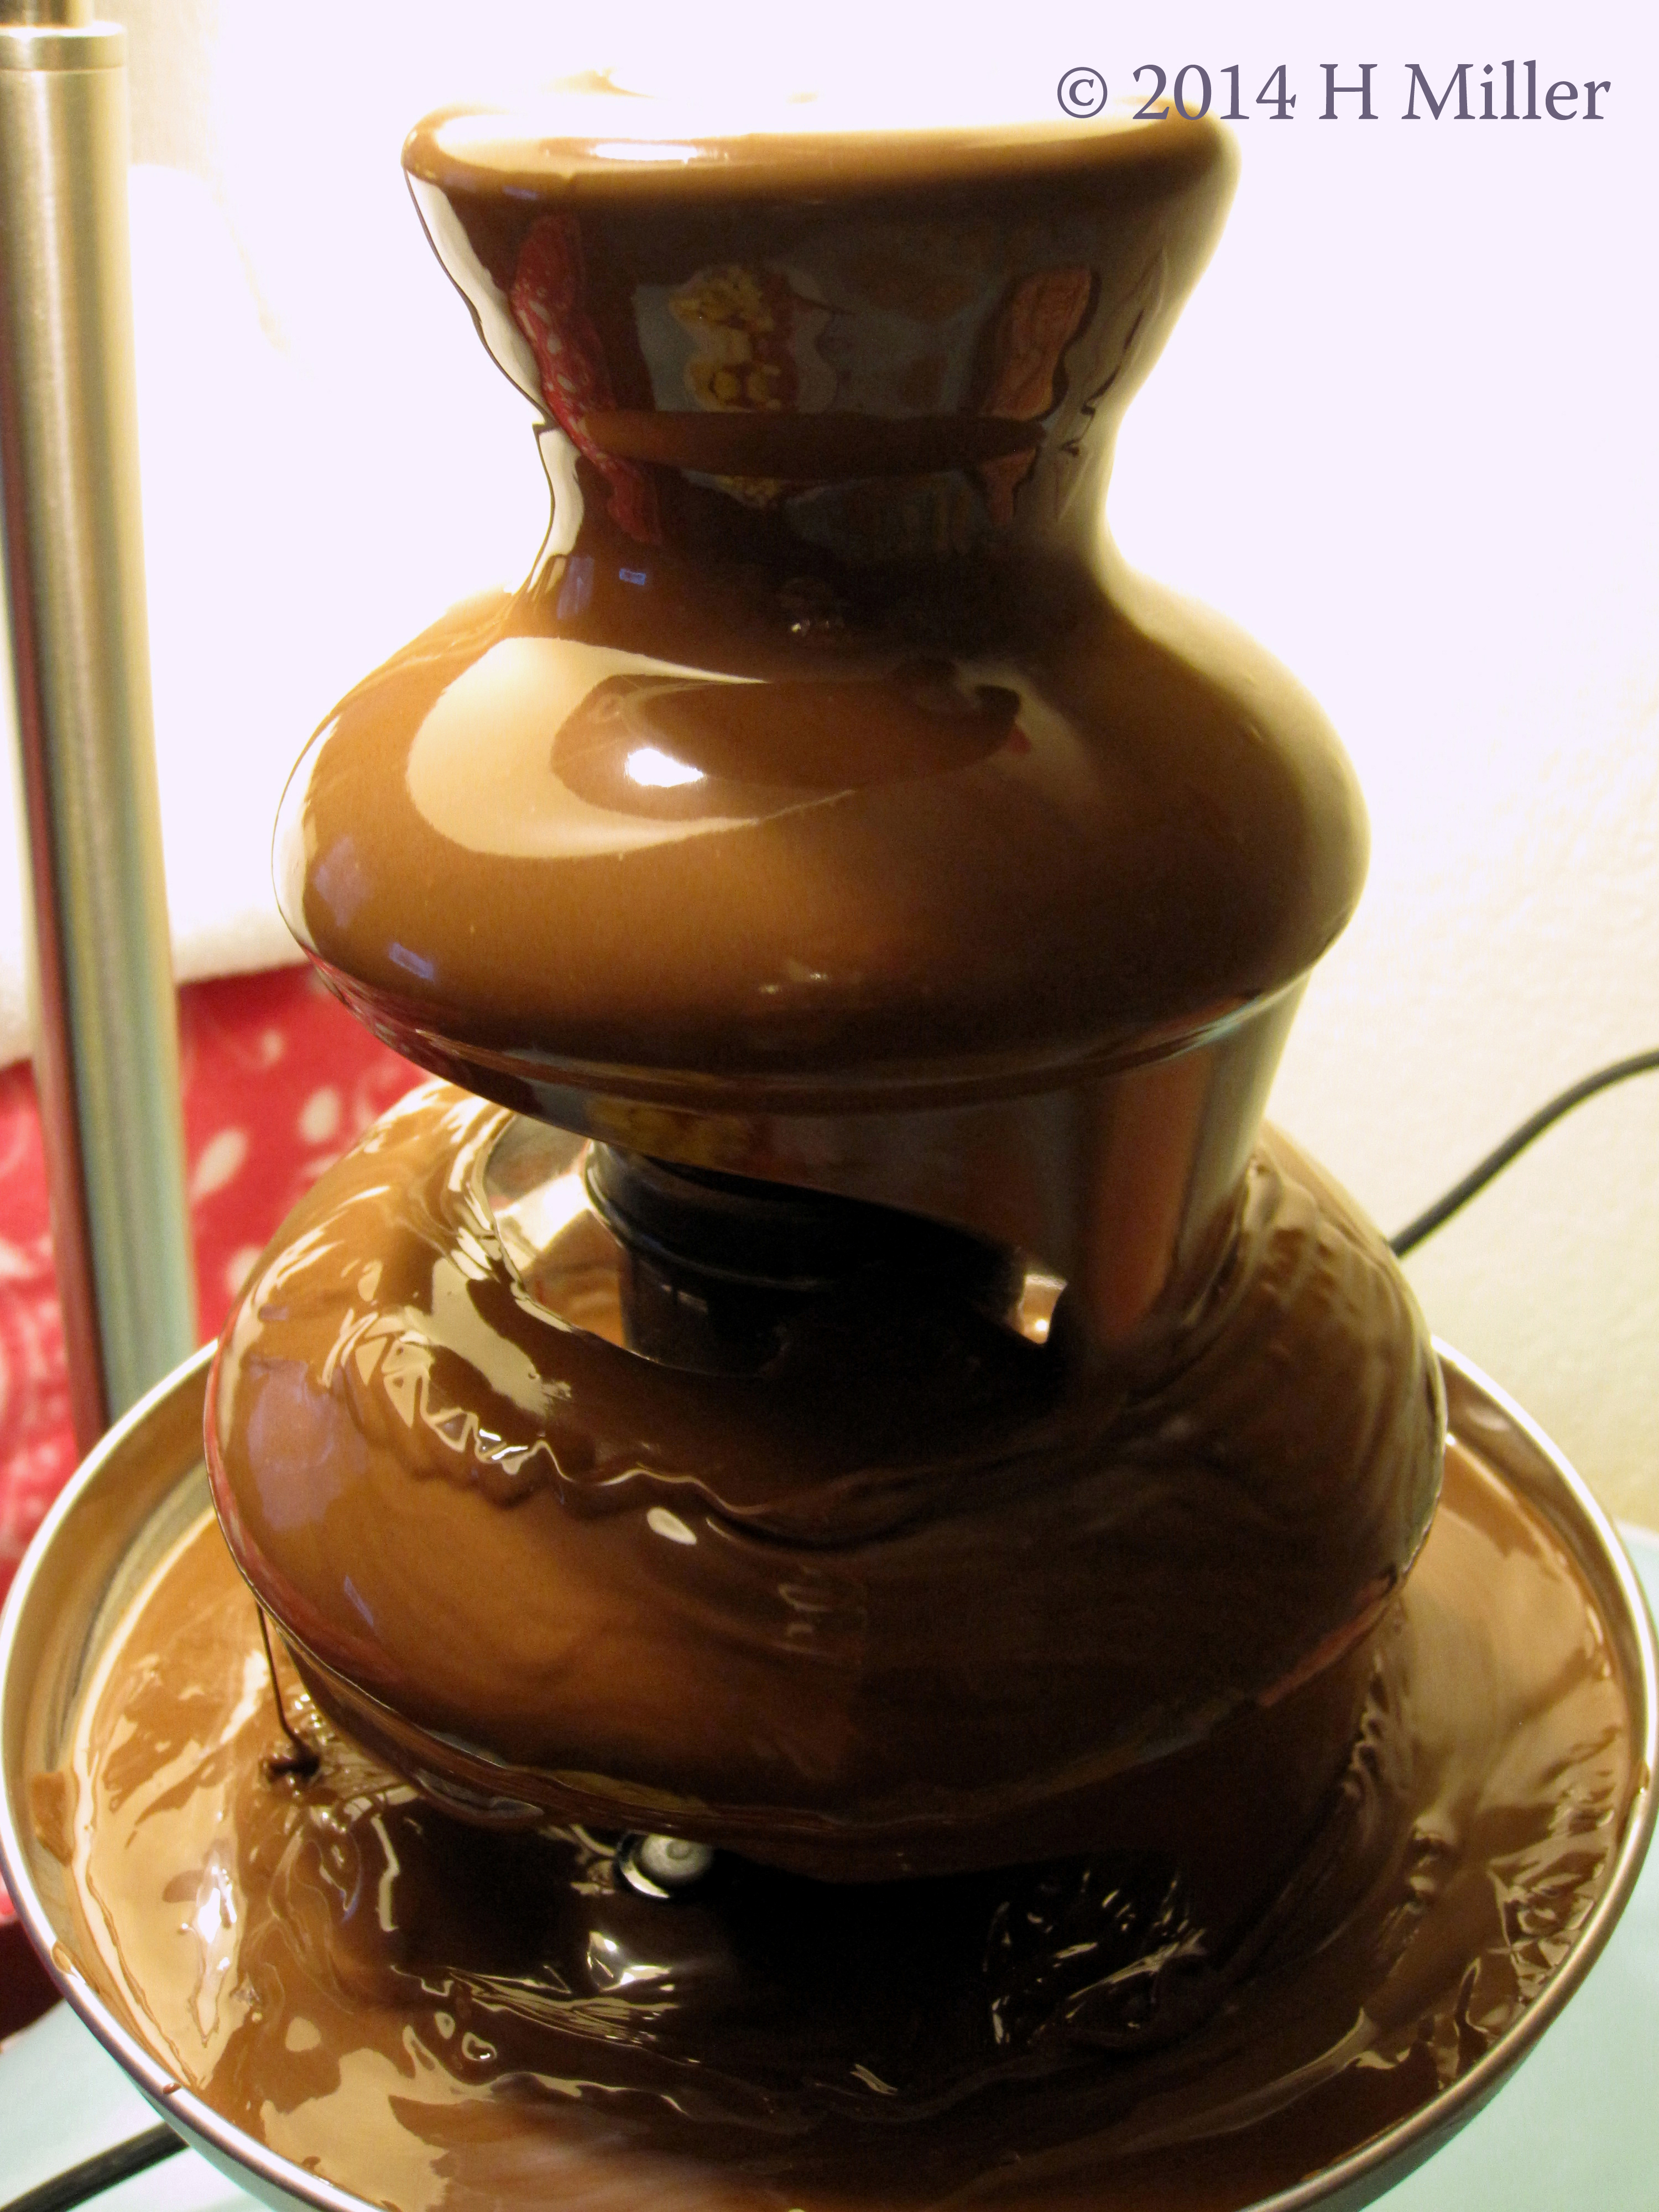 The Chocoloate Fountain Begins To Flow.